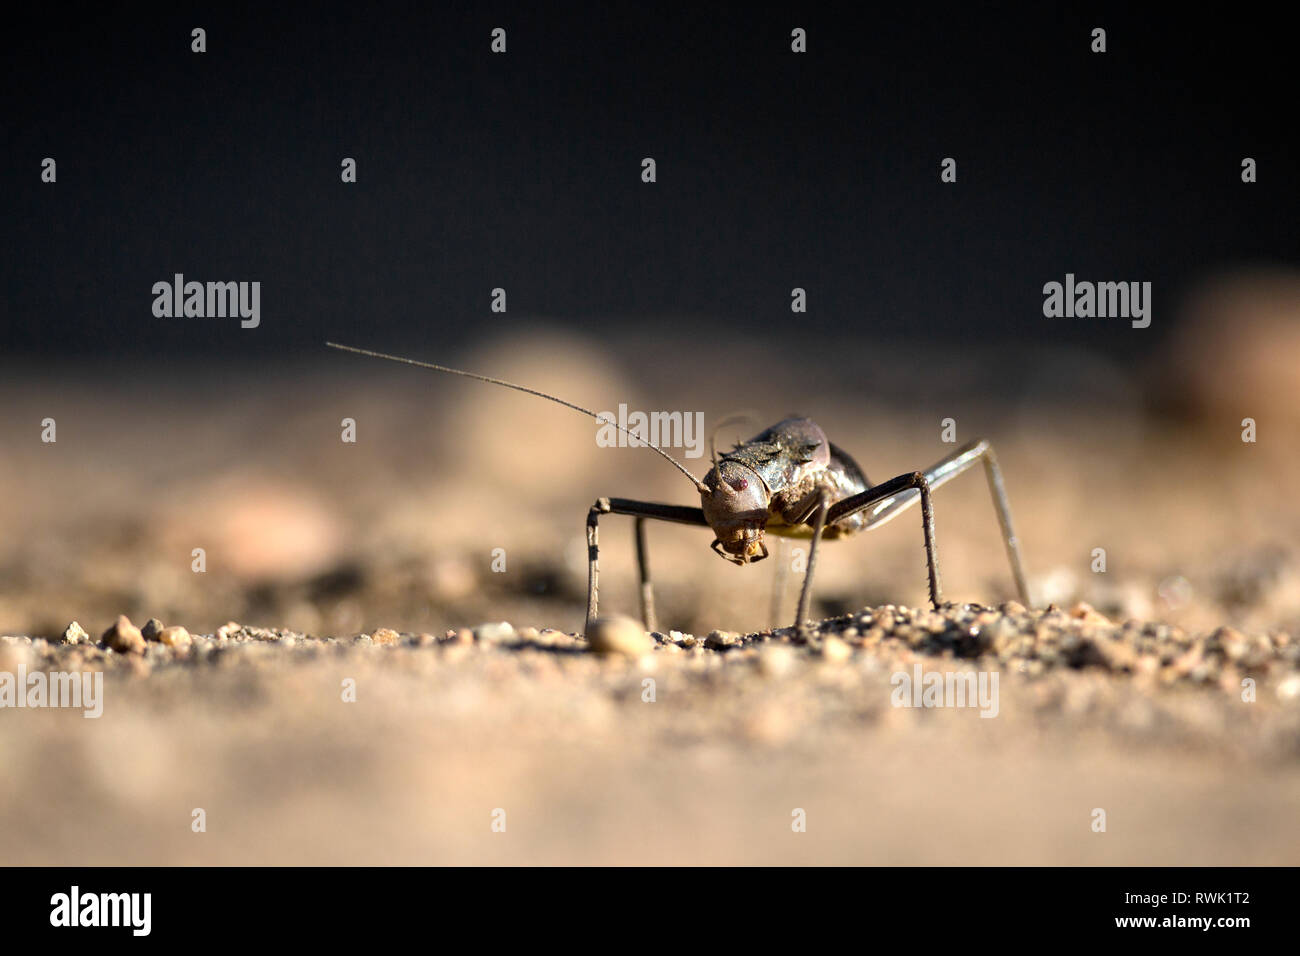 A Ground or Armour plated cricket close up. Stock Photo